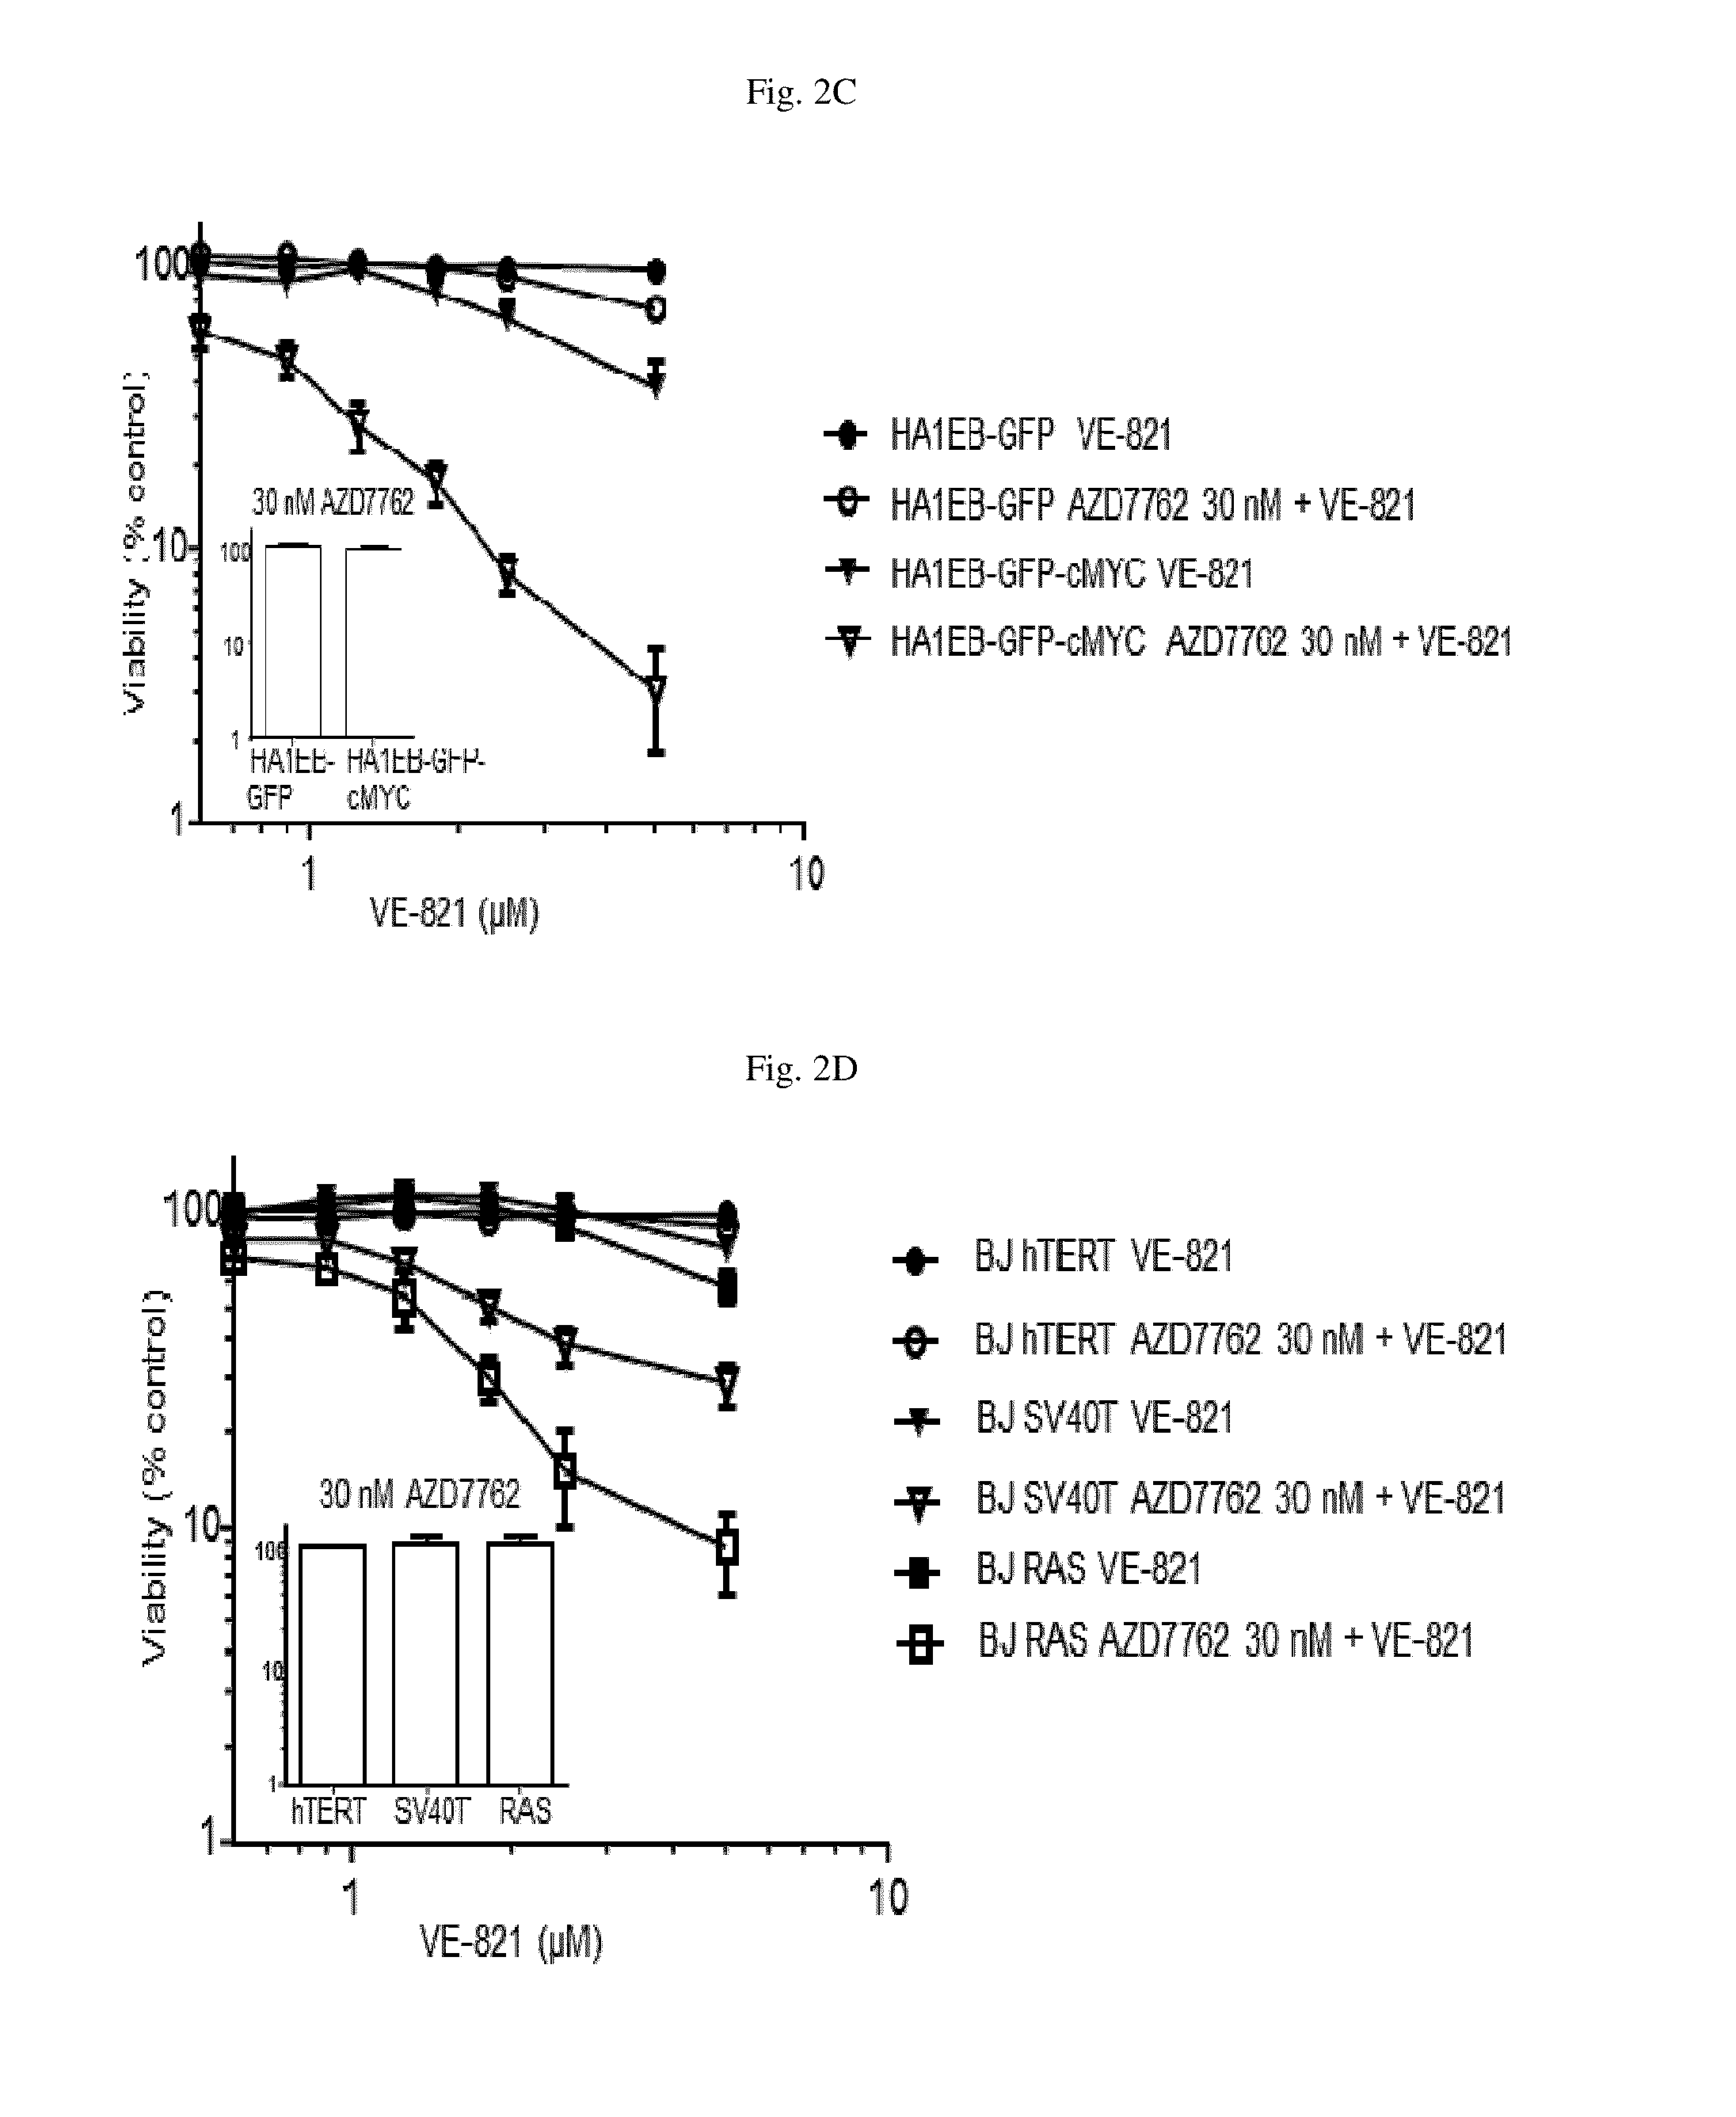 Method for treating cancer using a combination of chk1 and atr inhibitors